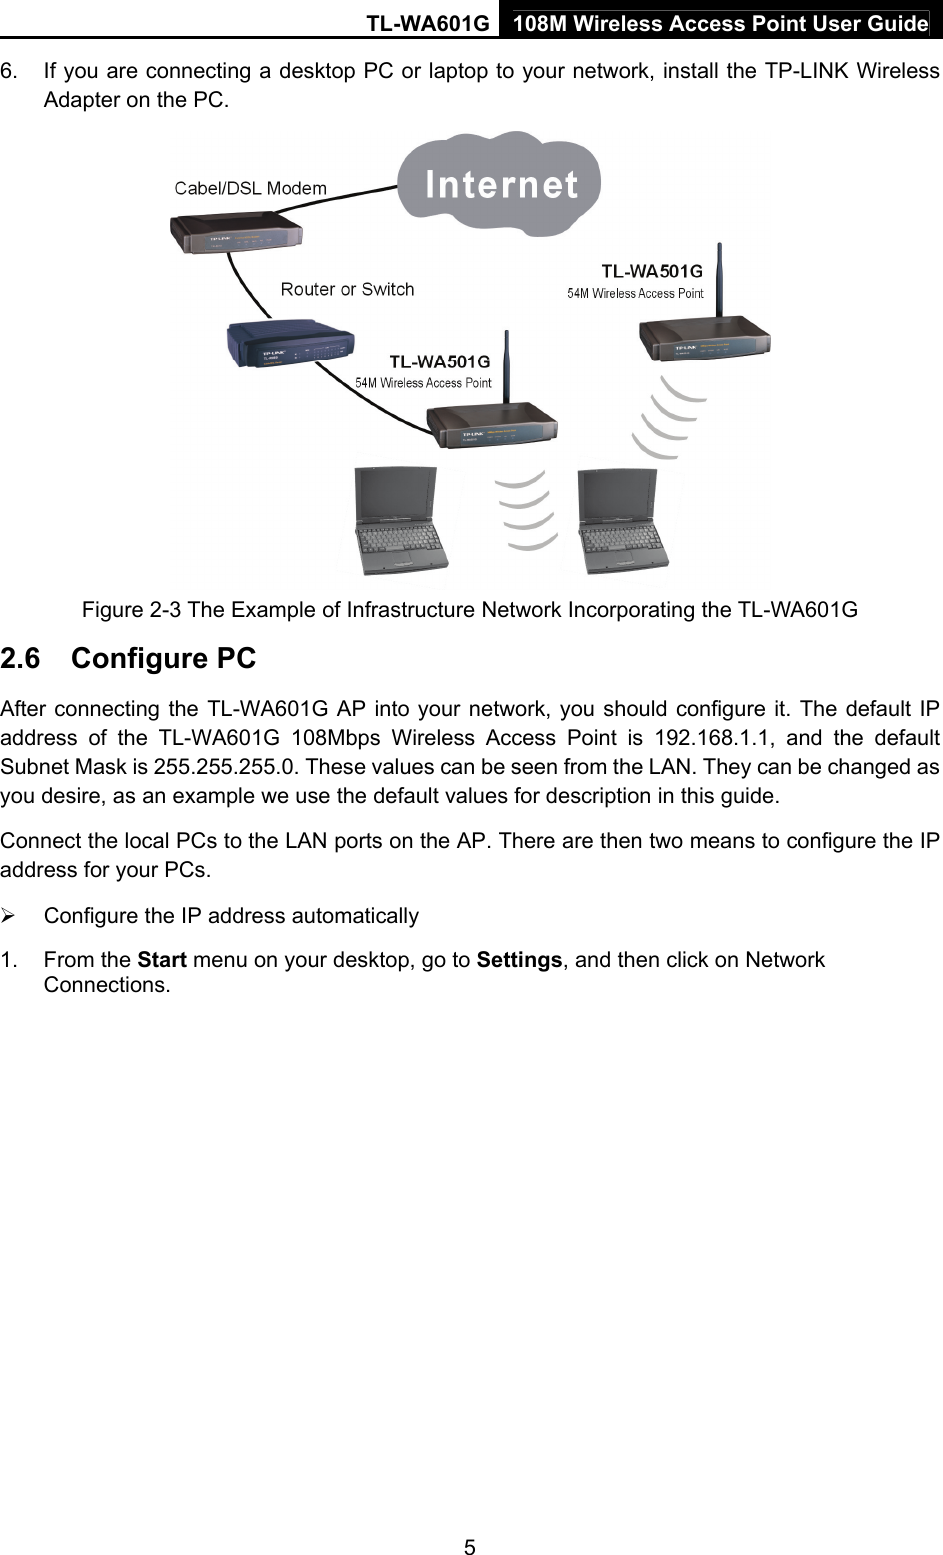 TL-WA601G 108M Wireless Access Point User Guide  56.  If you are connecting a desktop PC or laptop to your network, install the TP-LINK Wireless Adapter on the PC.  Figure 2-3 The Example of Infrastructure Network Incorporating the TL-WA601G 2.6  Configure PC After connecting the TL-WA601G AP into your network, you should configure it. The default IP address of the TL-WA601G 108Mbps Wireless Access Point is 192.168.1.1, and the default Subnet Mask is 255.255.255.0. These values can be seen from the LAN. They can be changed as you desire, as an example we use the default values for description in this guide. Connect the local PCs to the LAN ports on the AP. There are then two means to configure the IP address for your PCs. ¾  Configure the IP address automatically 1. From the Start menu on your desktop, go to Settings, and then click on Network Connections. 